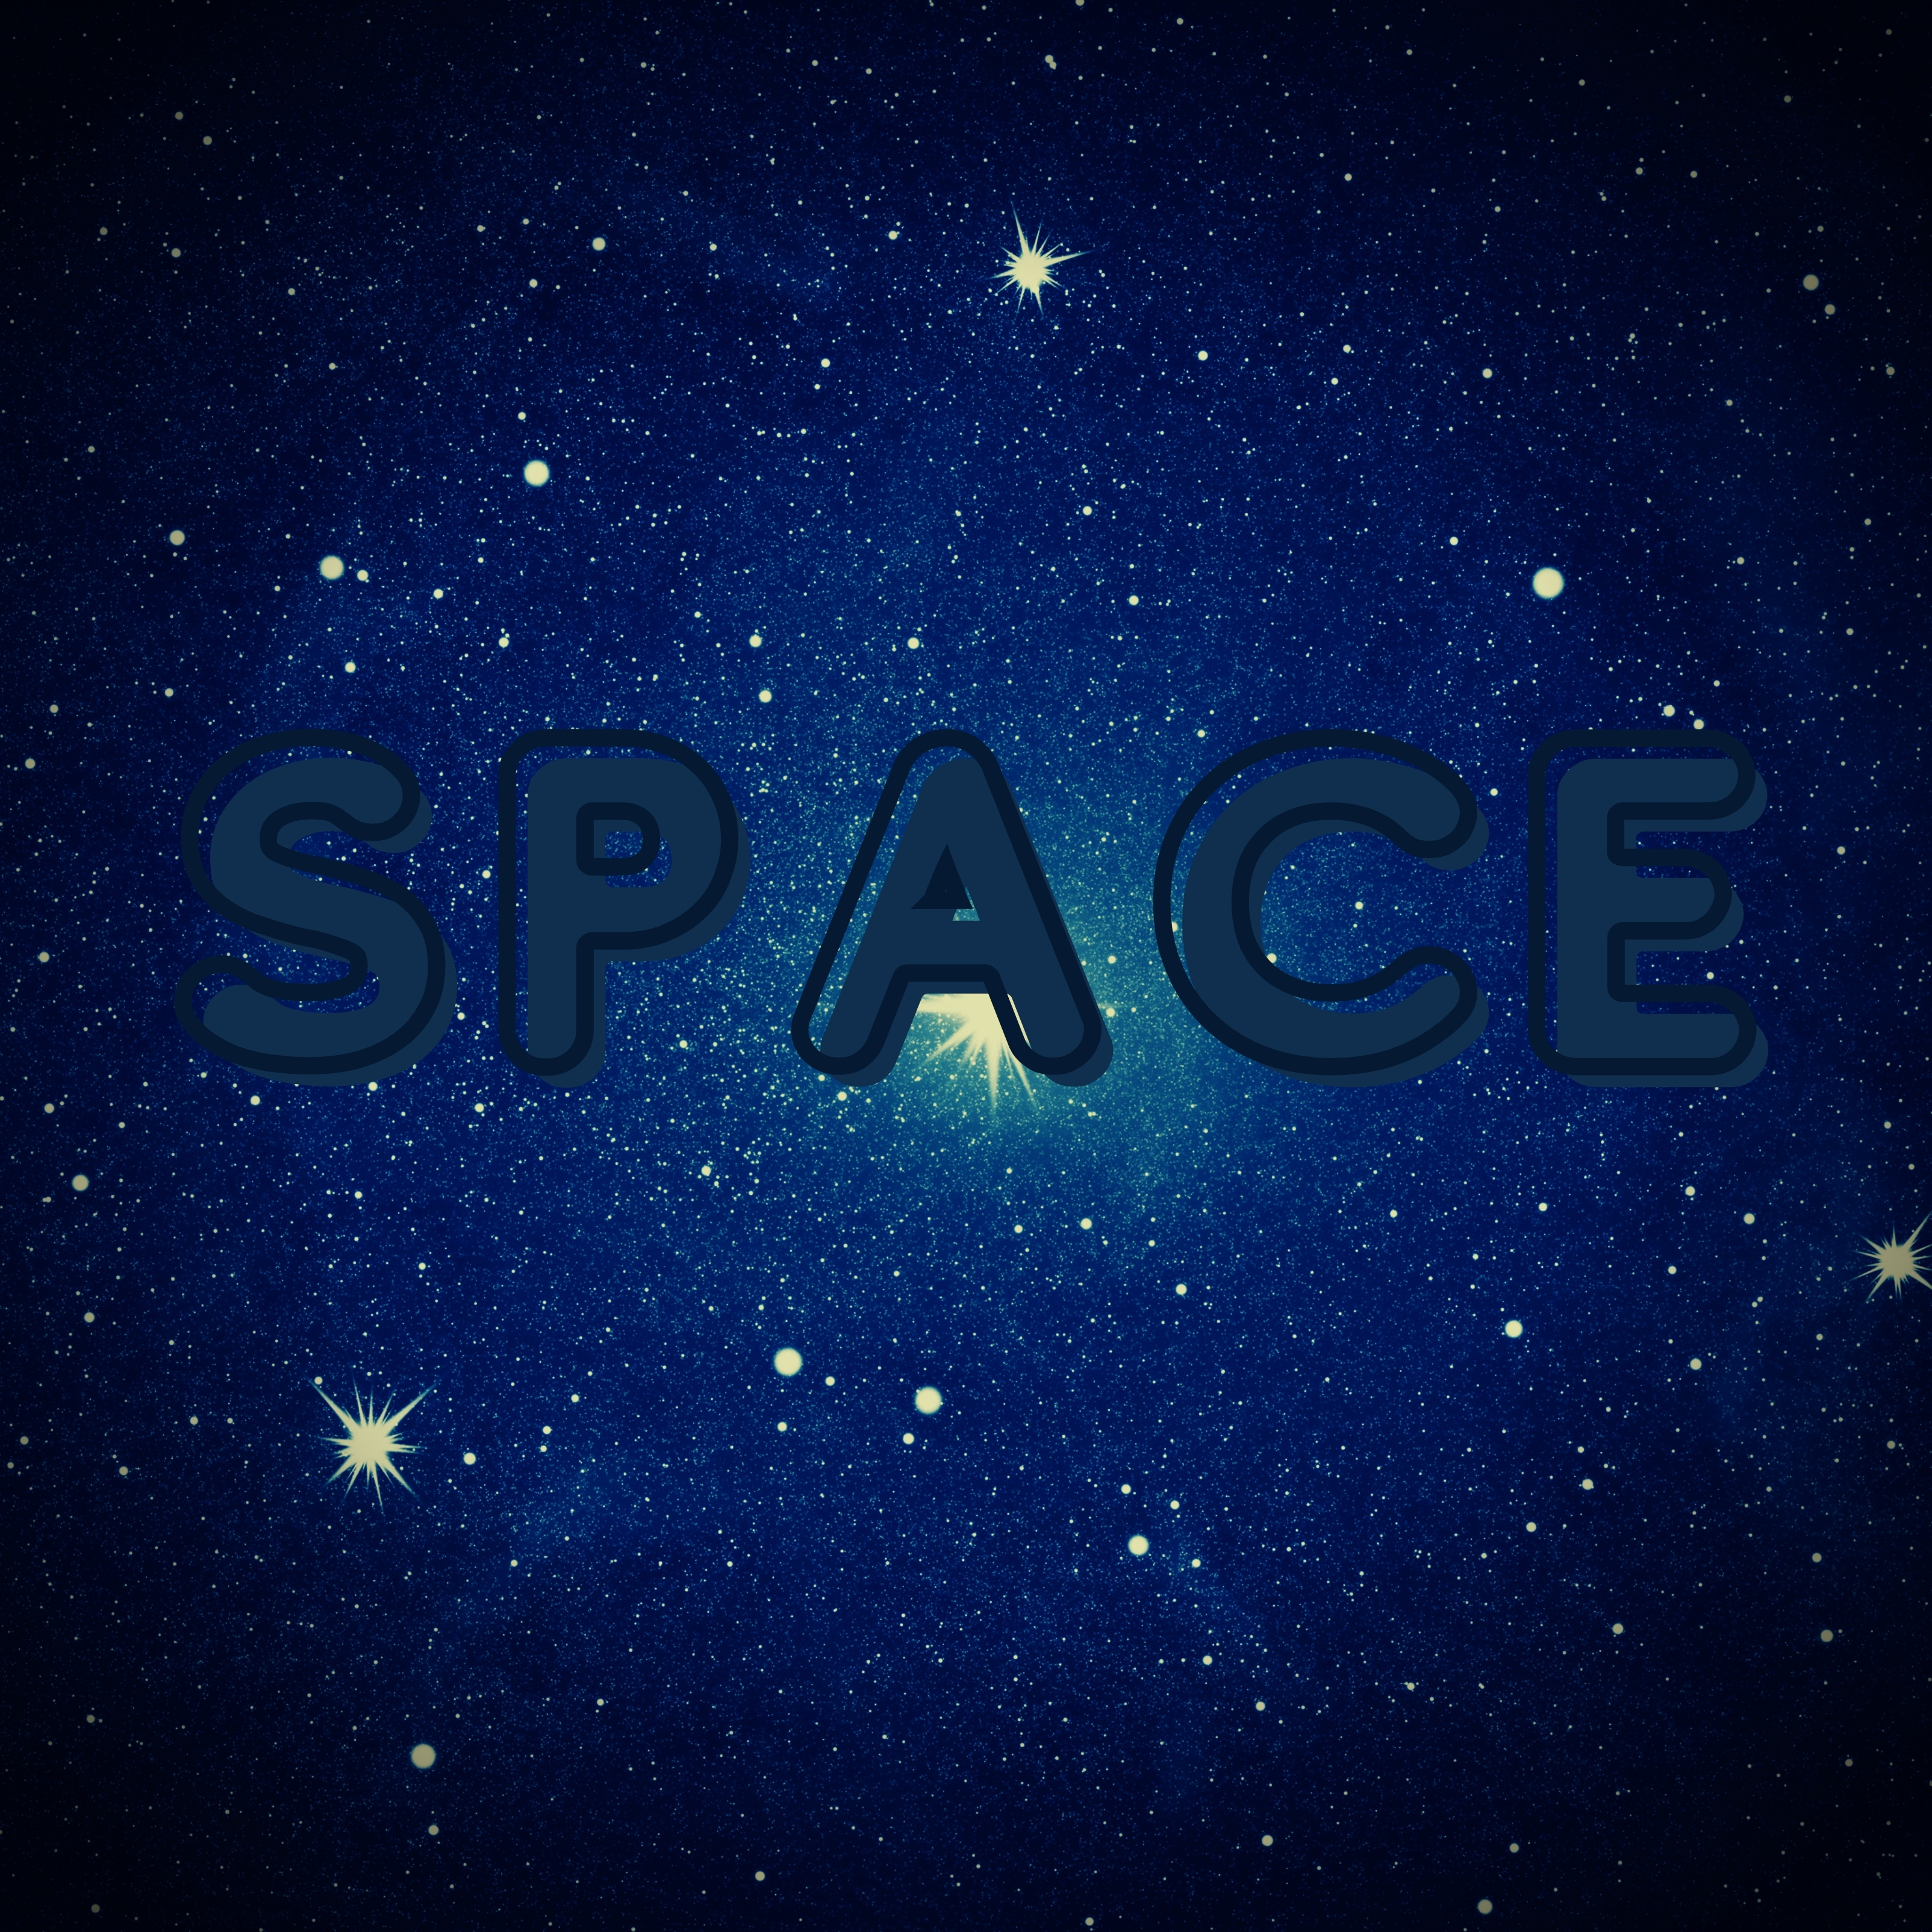 iPad Wallpapers Space Background Galaxy iPad Wallpaper 3208x3208 px